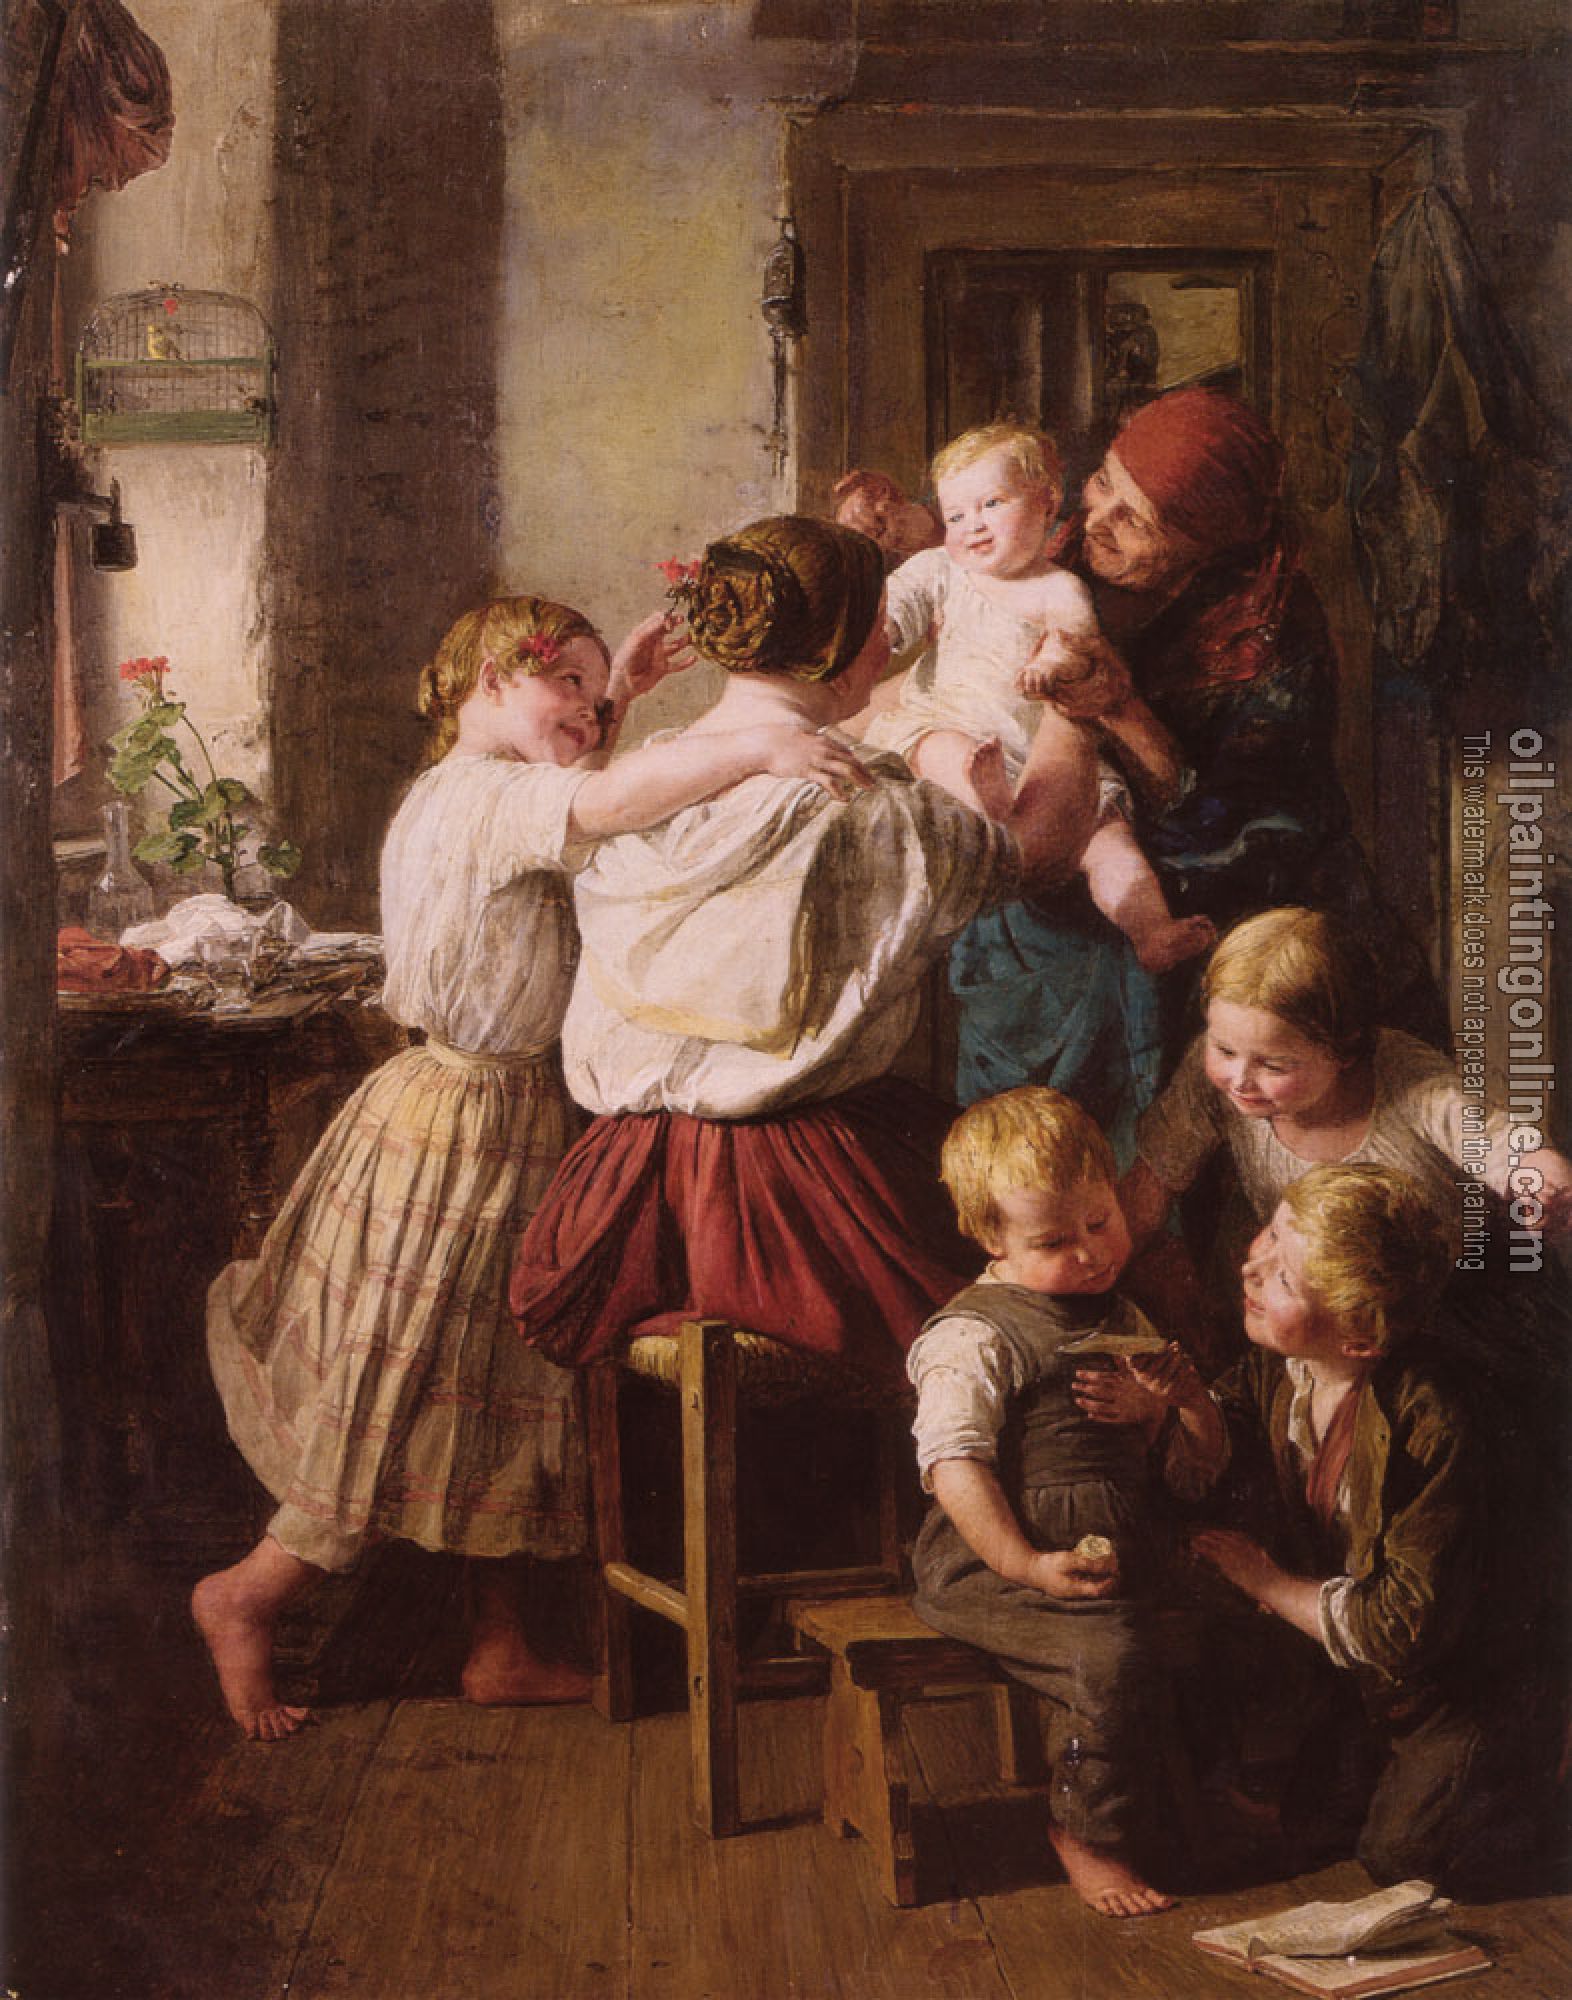 Waldmuller, Ferdinand Georg - Children Making Their Grandmother a Present on Her Name Day